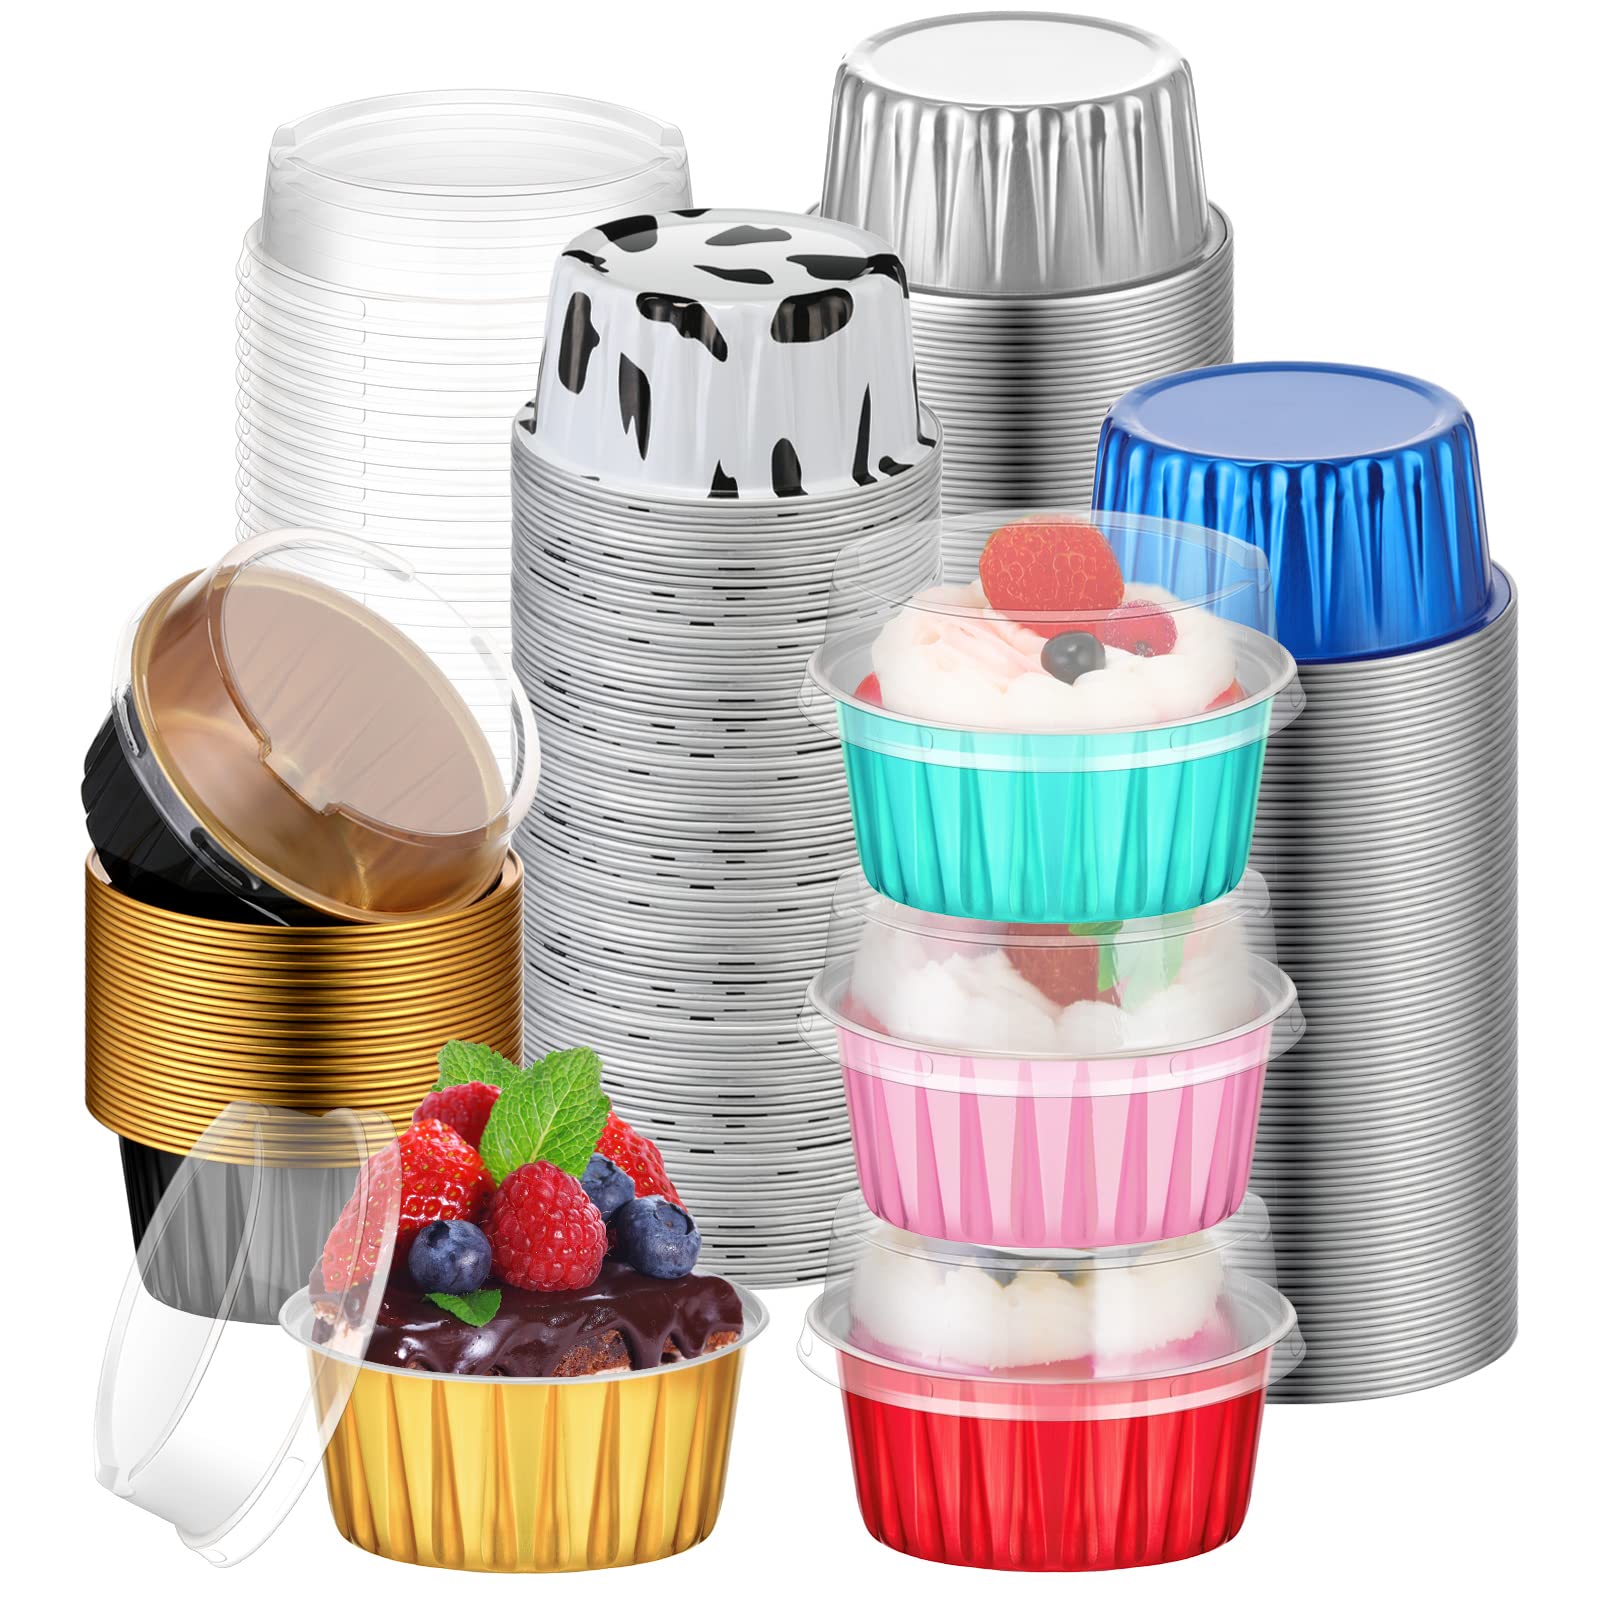 120 Pcs Aluminum Foil Baking Cups Mini Cake Pans with Lids 5 oz Cupcake Liners Disposable Muffin Tins Cupcake Wrappers Baking Foil Ramekins Pans Aluminum Cupcake Cups for Birthday Party (Multicolor)